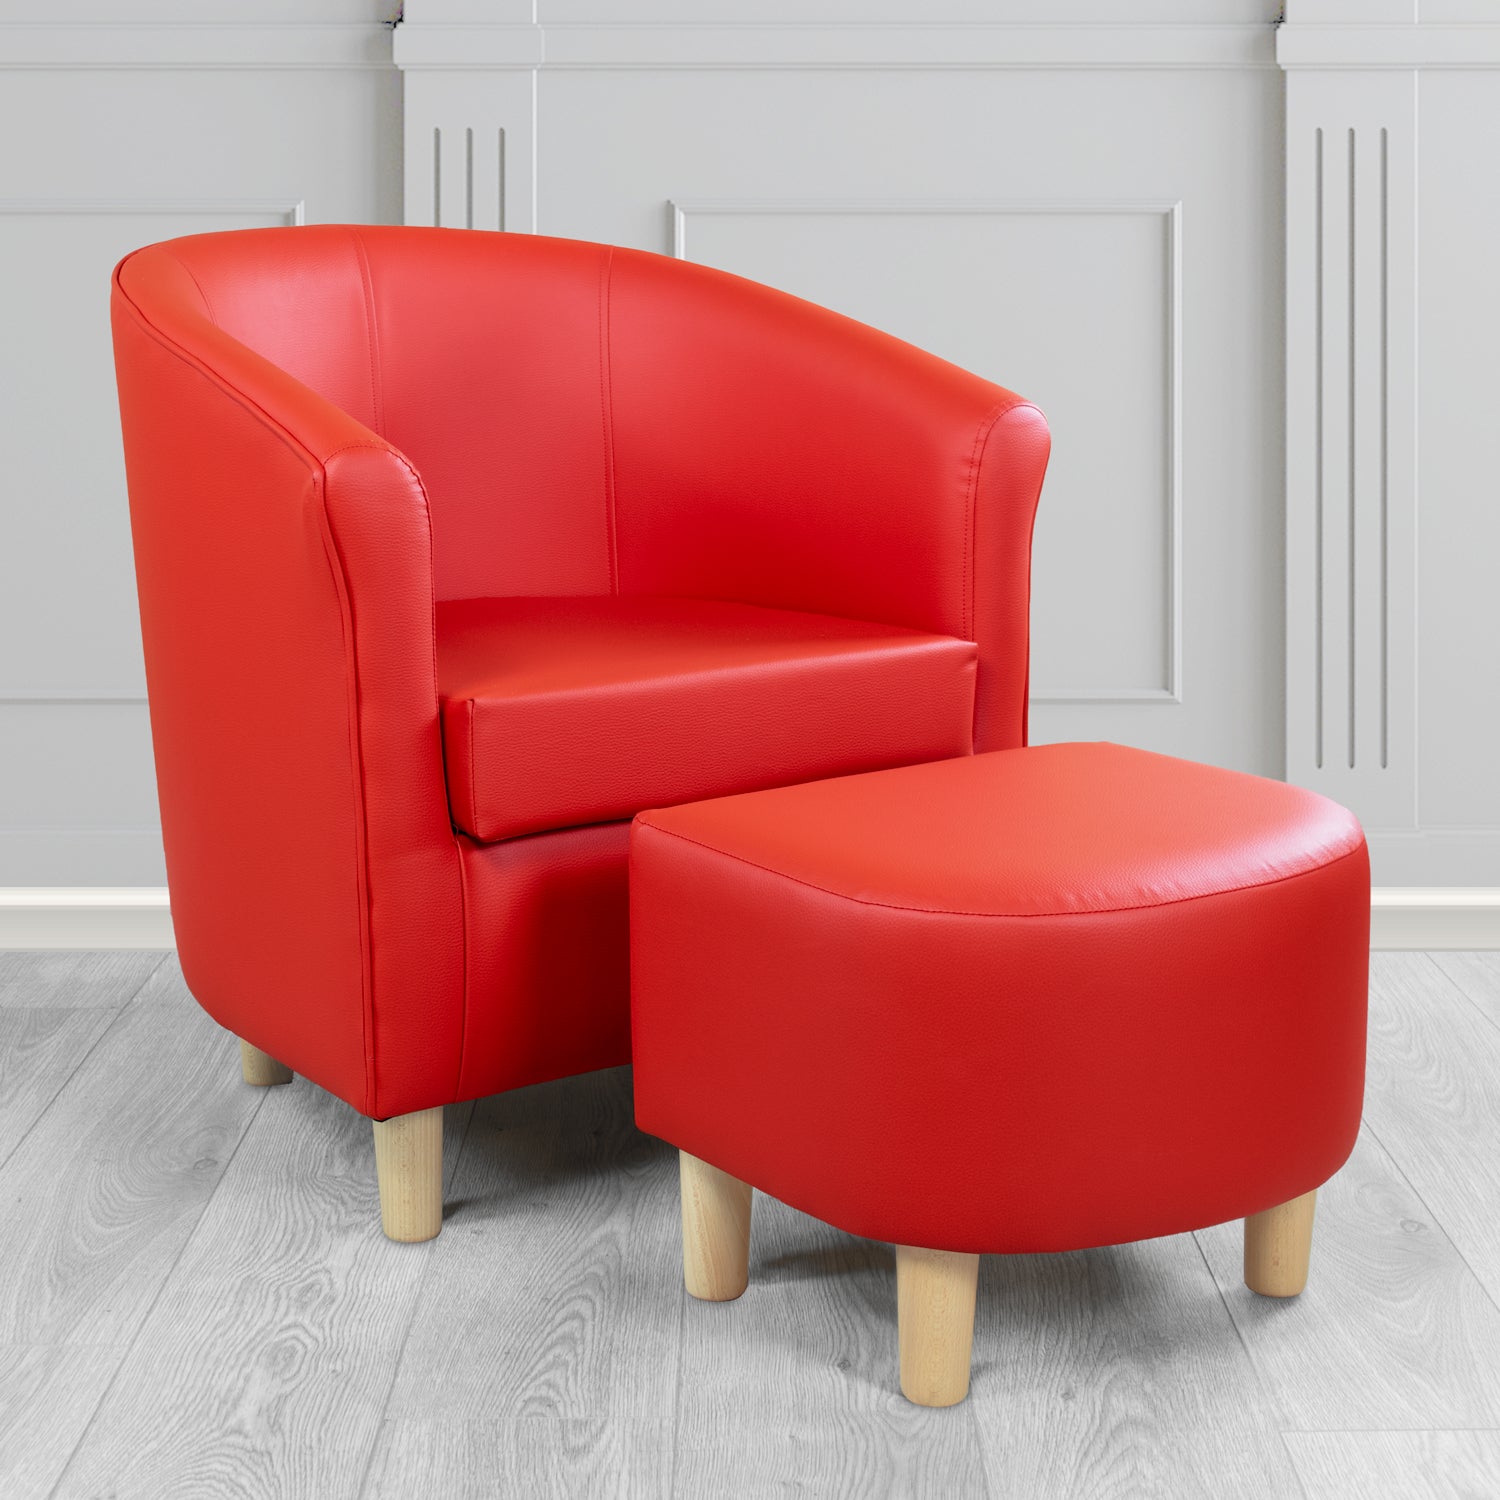 Tuscany Tub Chair with Footstool Set in Madrid Rouge Faux Leather - The Tub Chair Shop